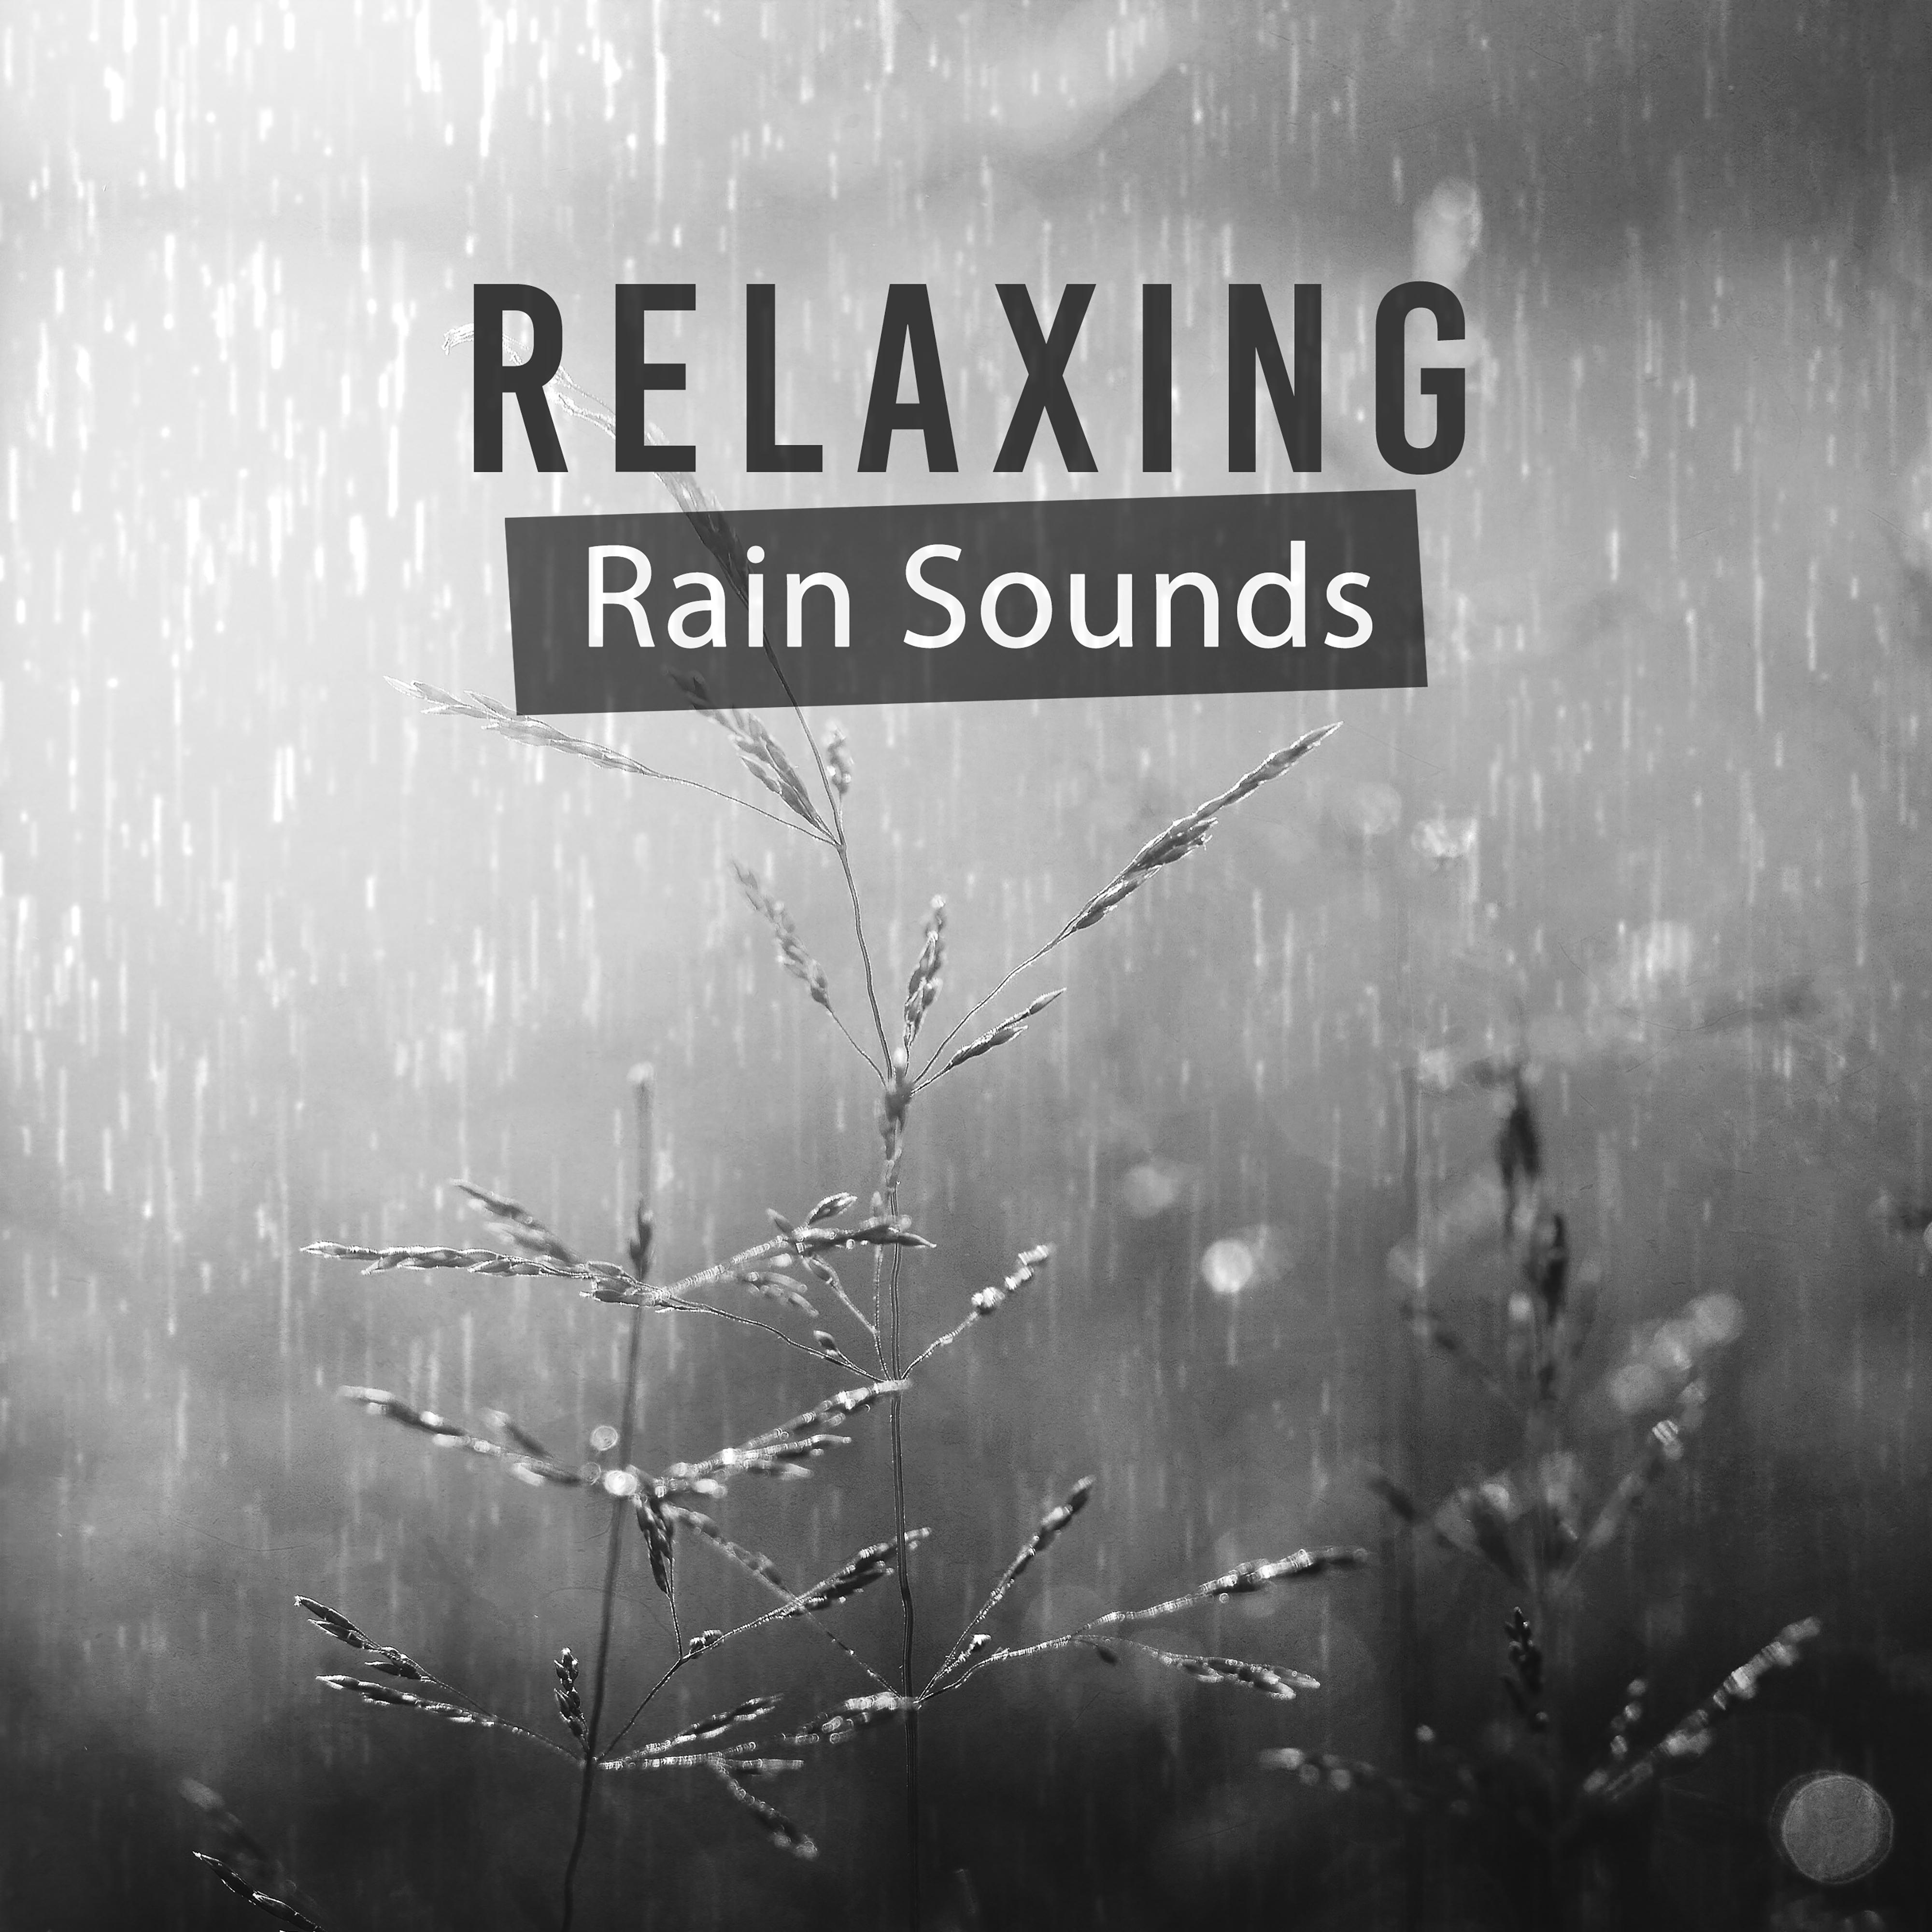 Relaxing Rain Sounds  Sounds to Rest, Calming Water Waves, Healing Therapy, Rain Music